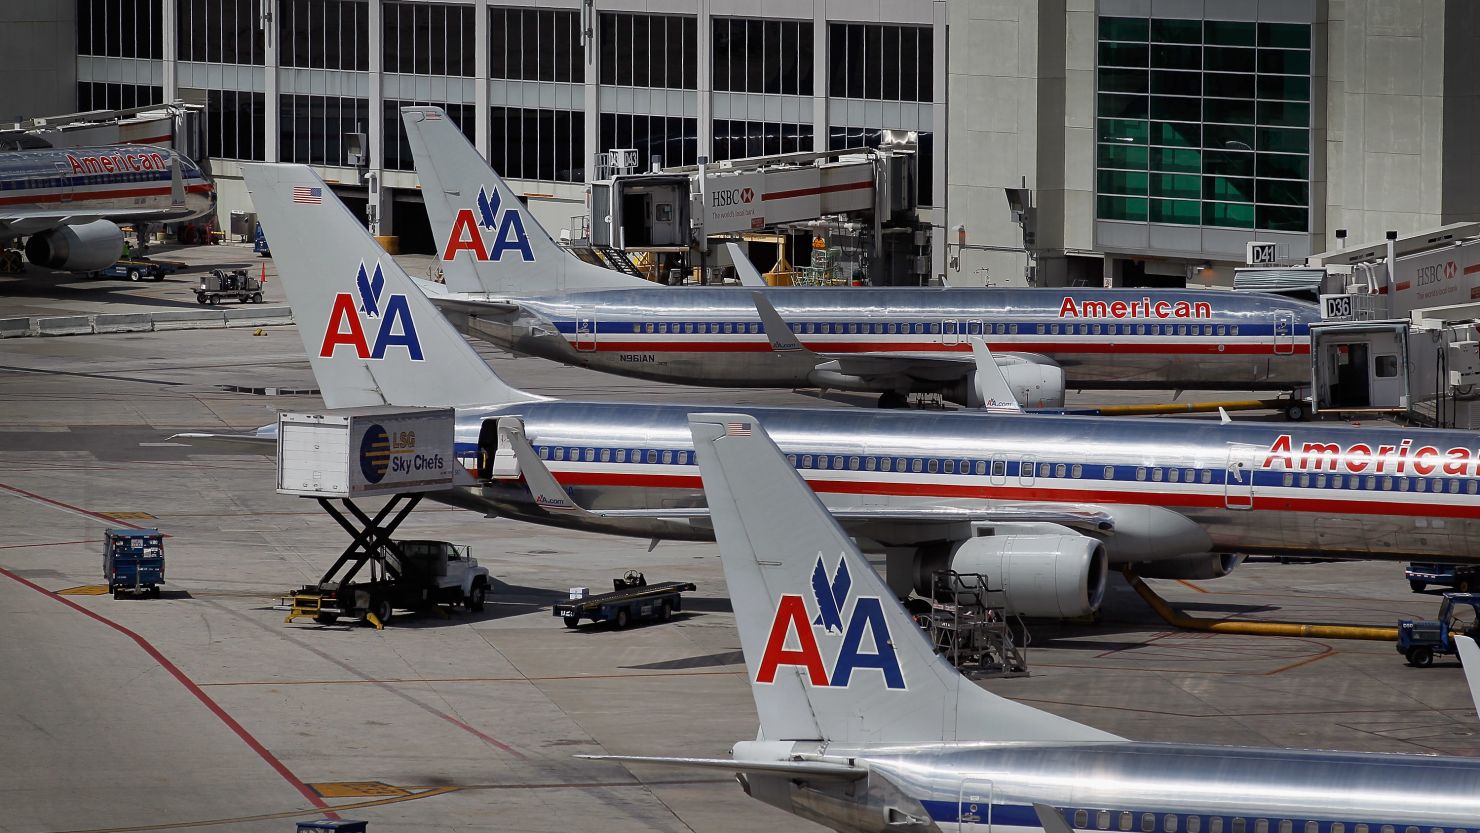 Even if American Airlines were to go bankrupt, flights wouldn't be affected, Brett Snyder says.